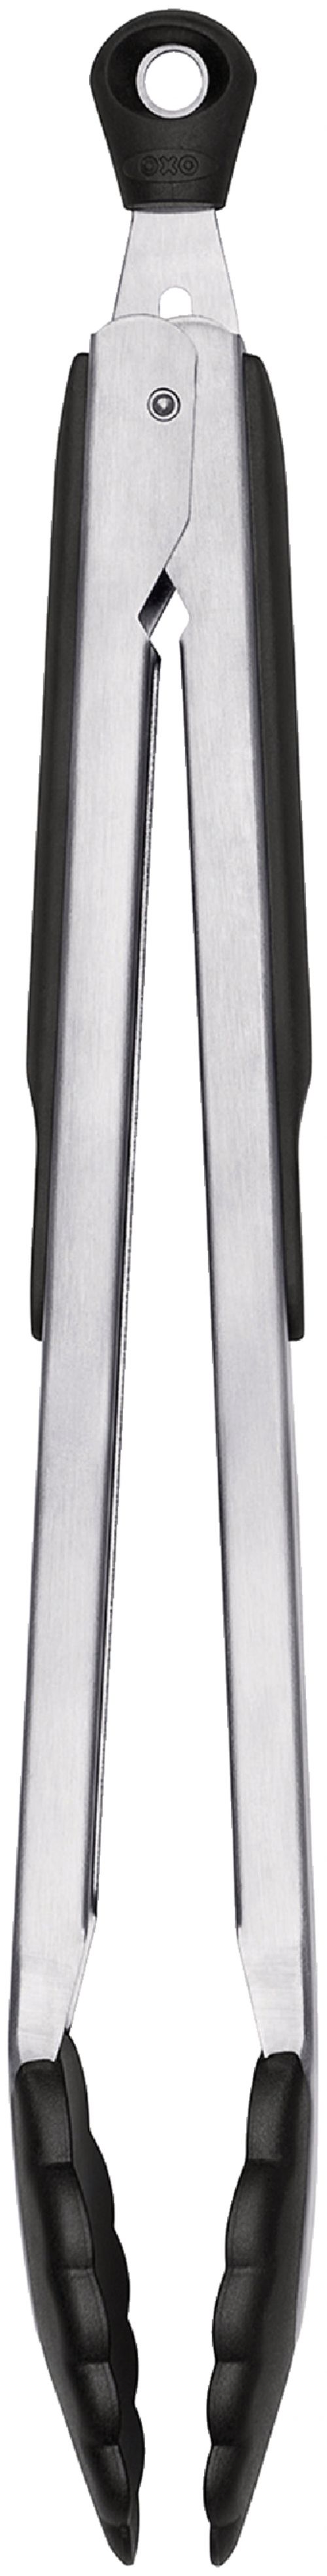 OXO Good Grips 12 In. Stainless Steel Tongs with Nylon Heads